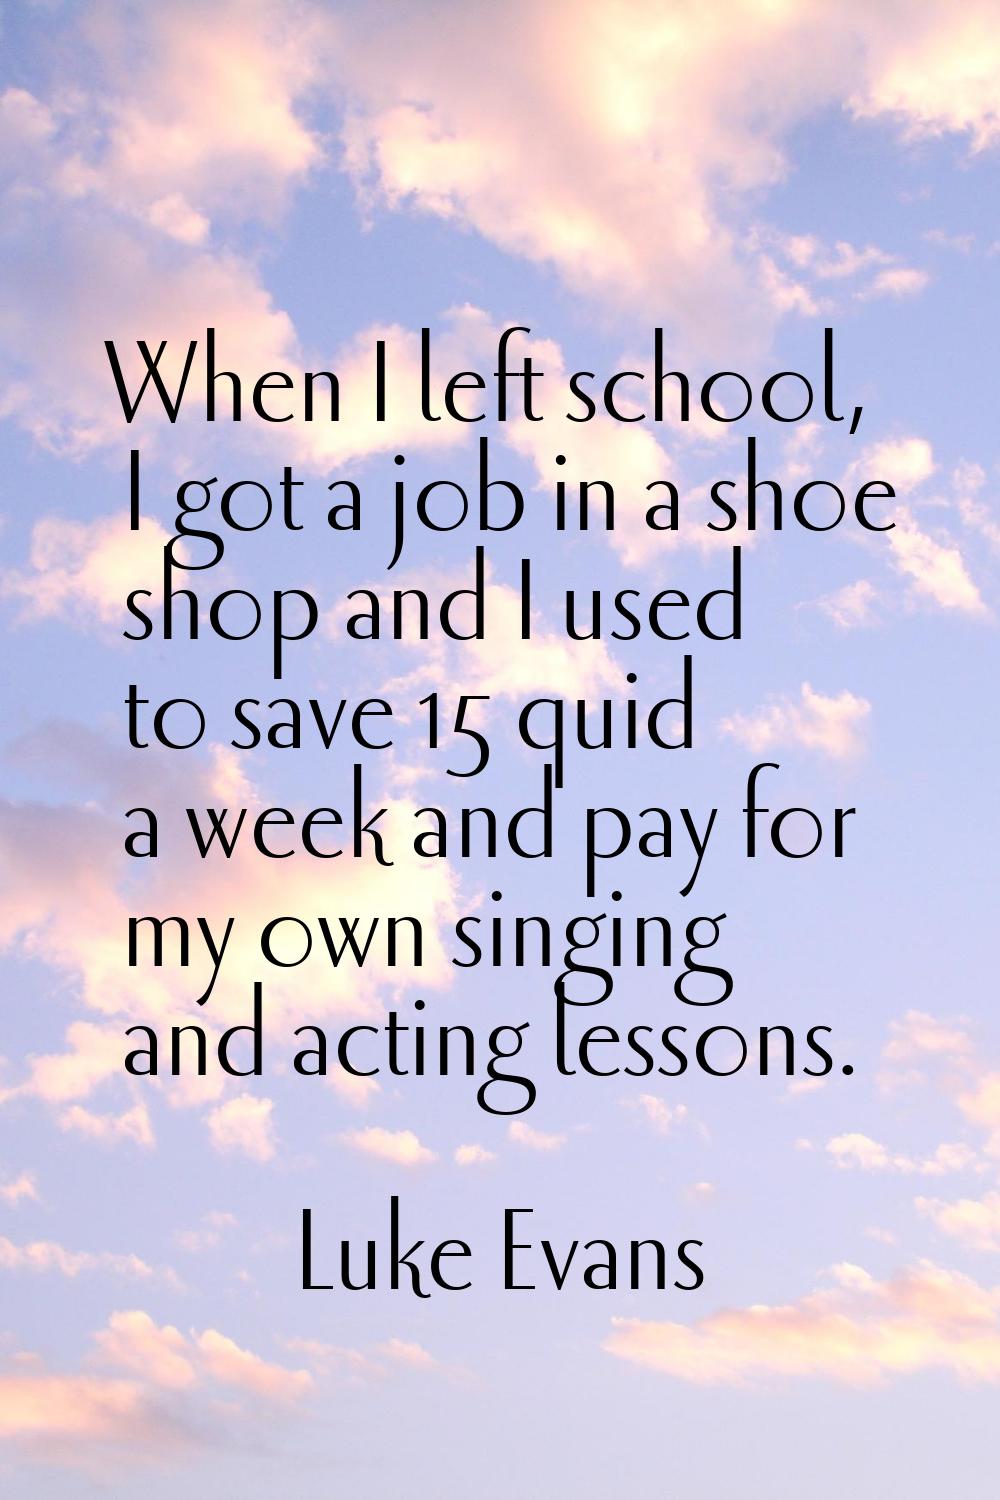 When I left school, I got a job in a shoe shop and I used to save 15 quid a week and pay for my own